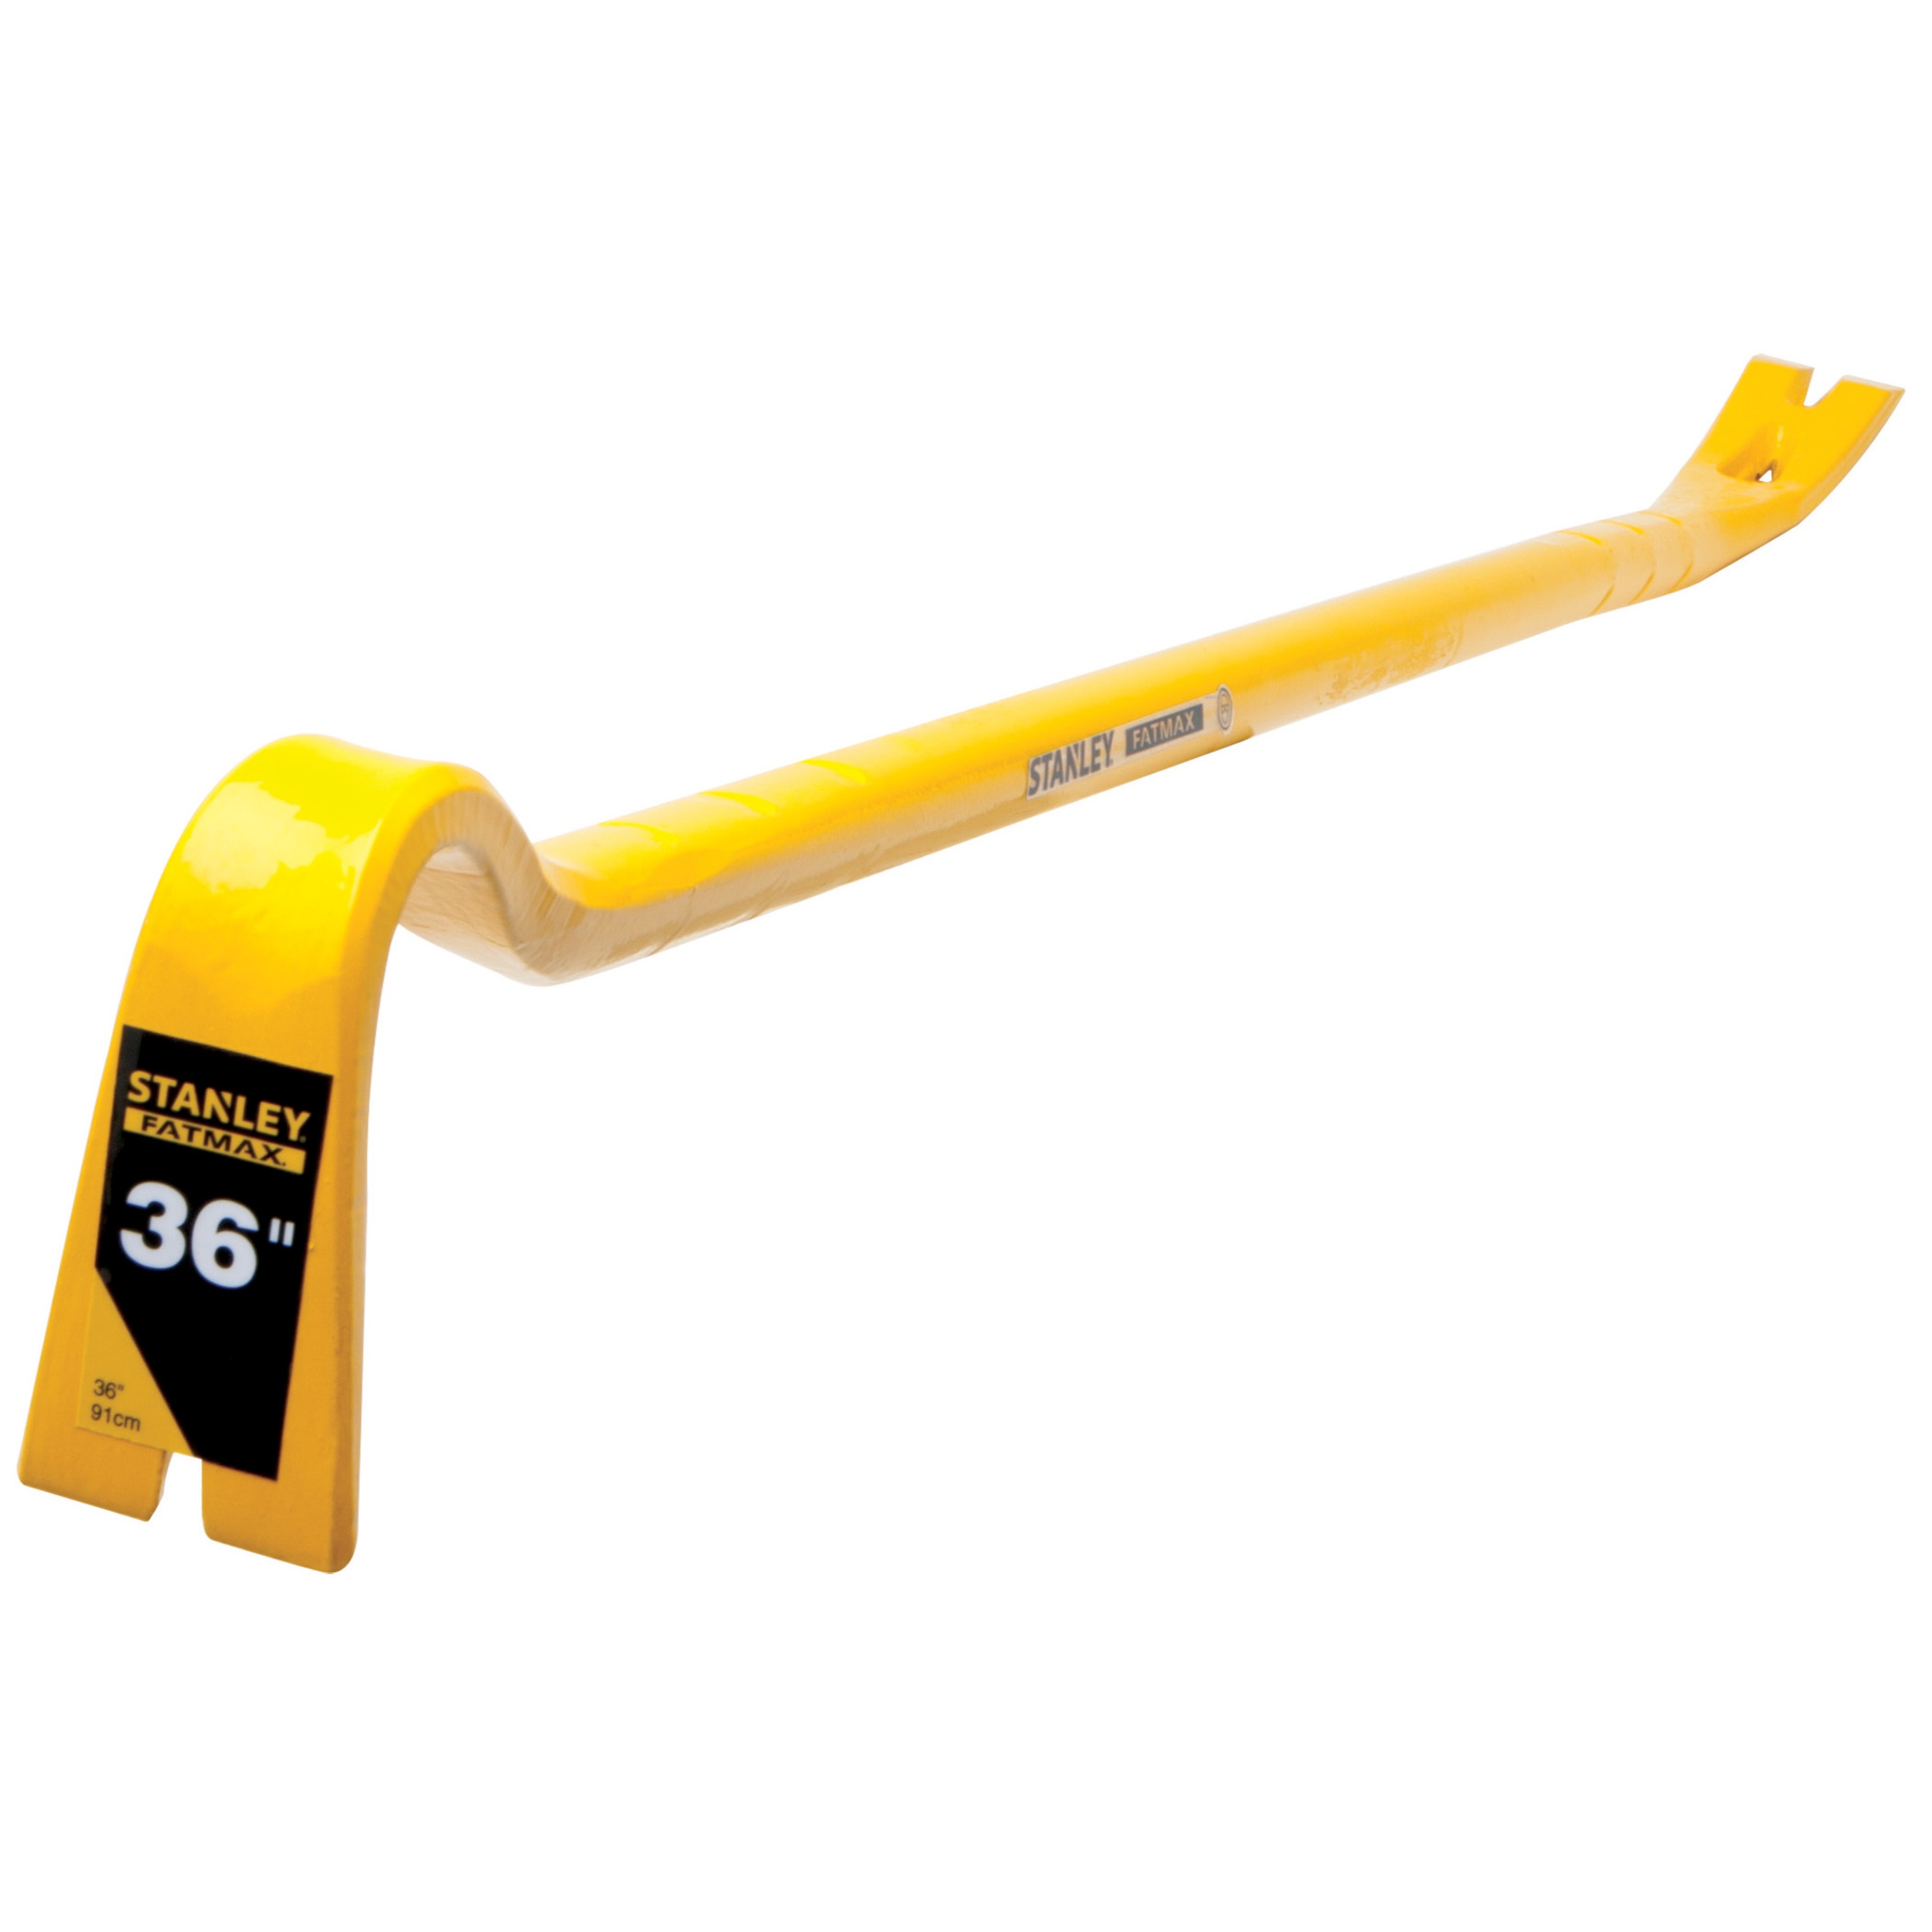 Stanley Tools - 36 in FATMAX Wrecking Bar - 55-104